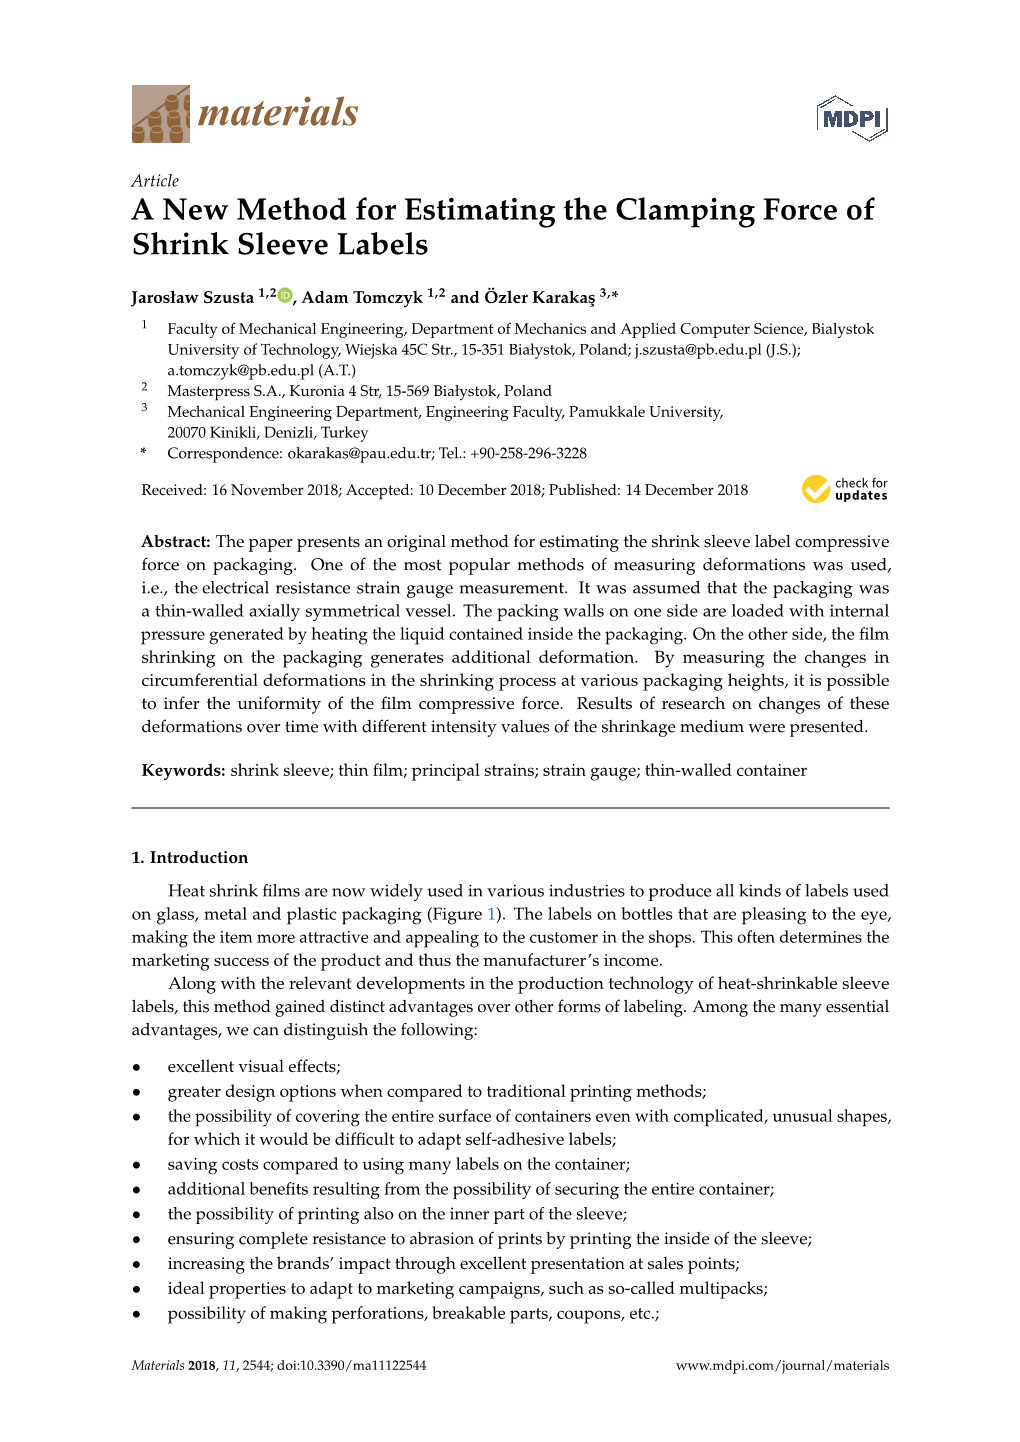 A New Method for Estimating the Clamping Force of Shrink Sleeve Labels